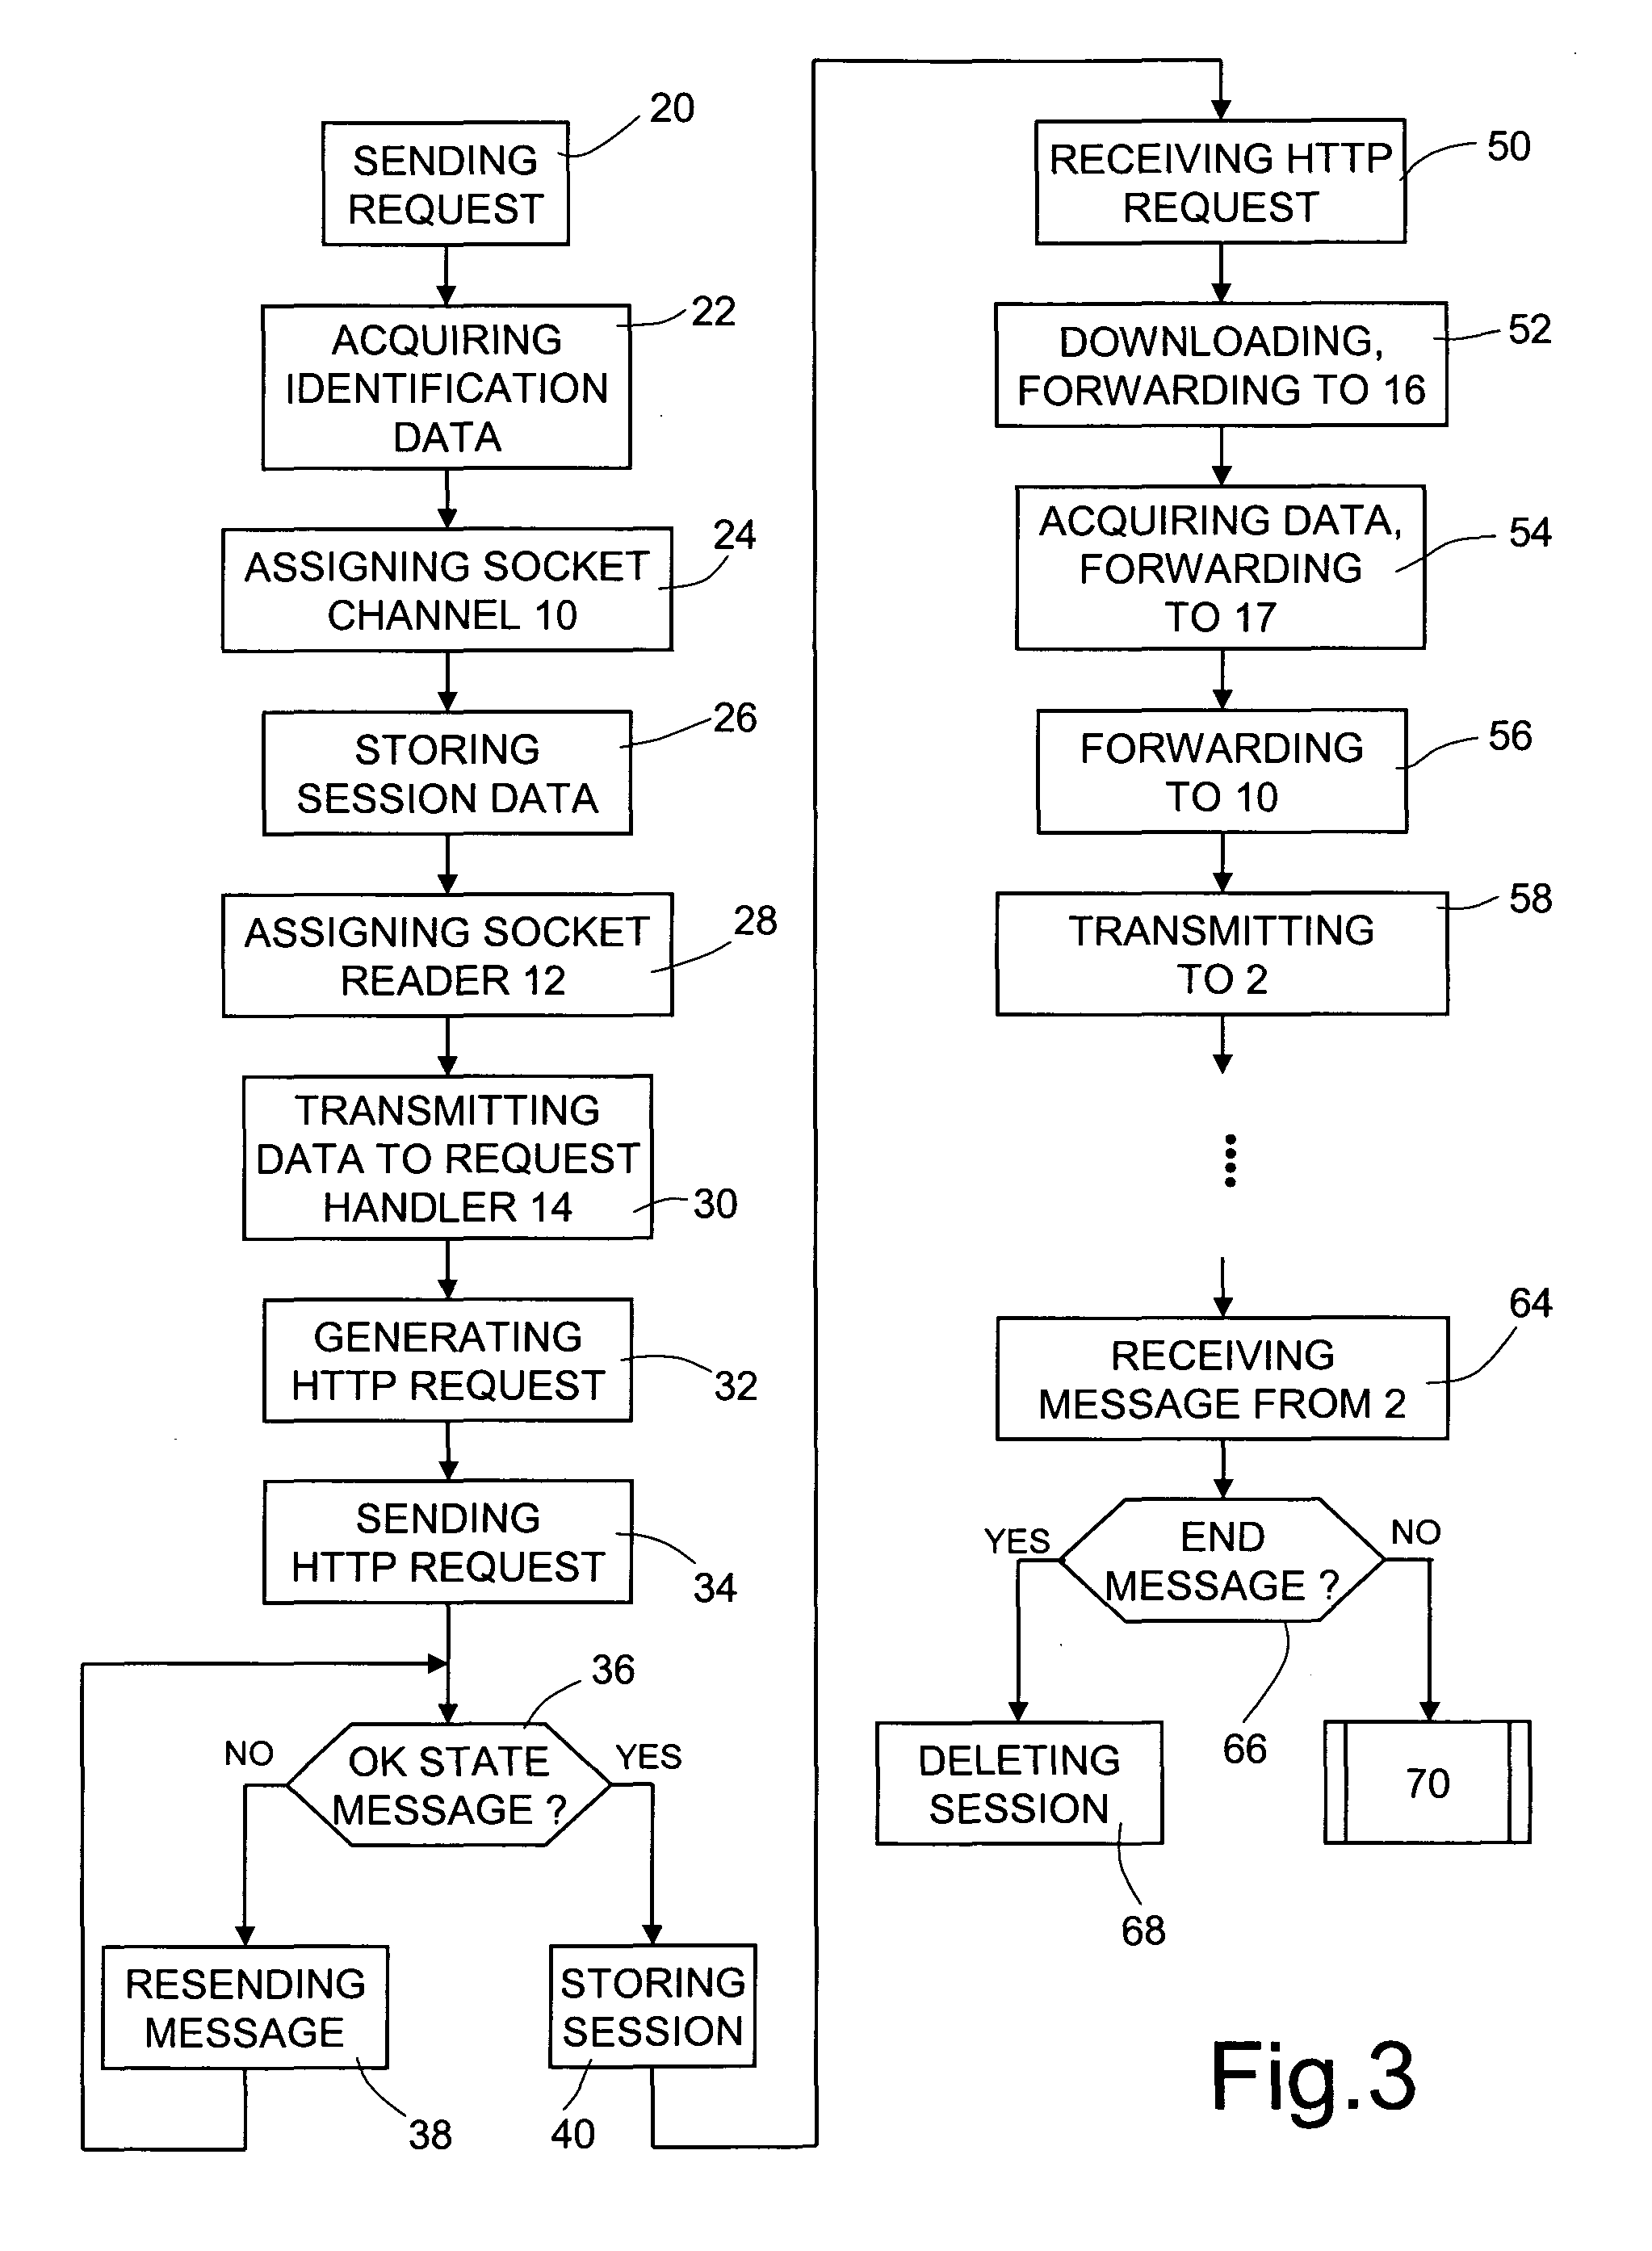 System and method for performing mobile services, in particular push services in a wireless communication